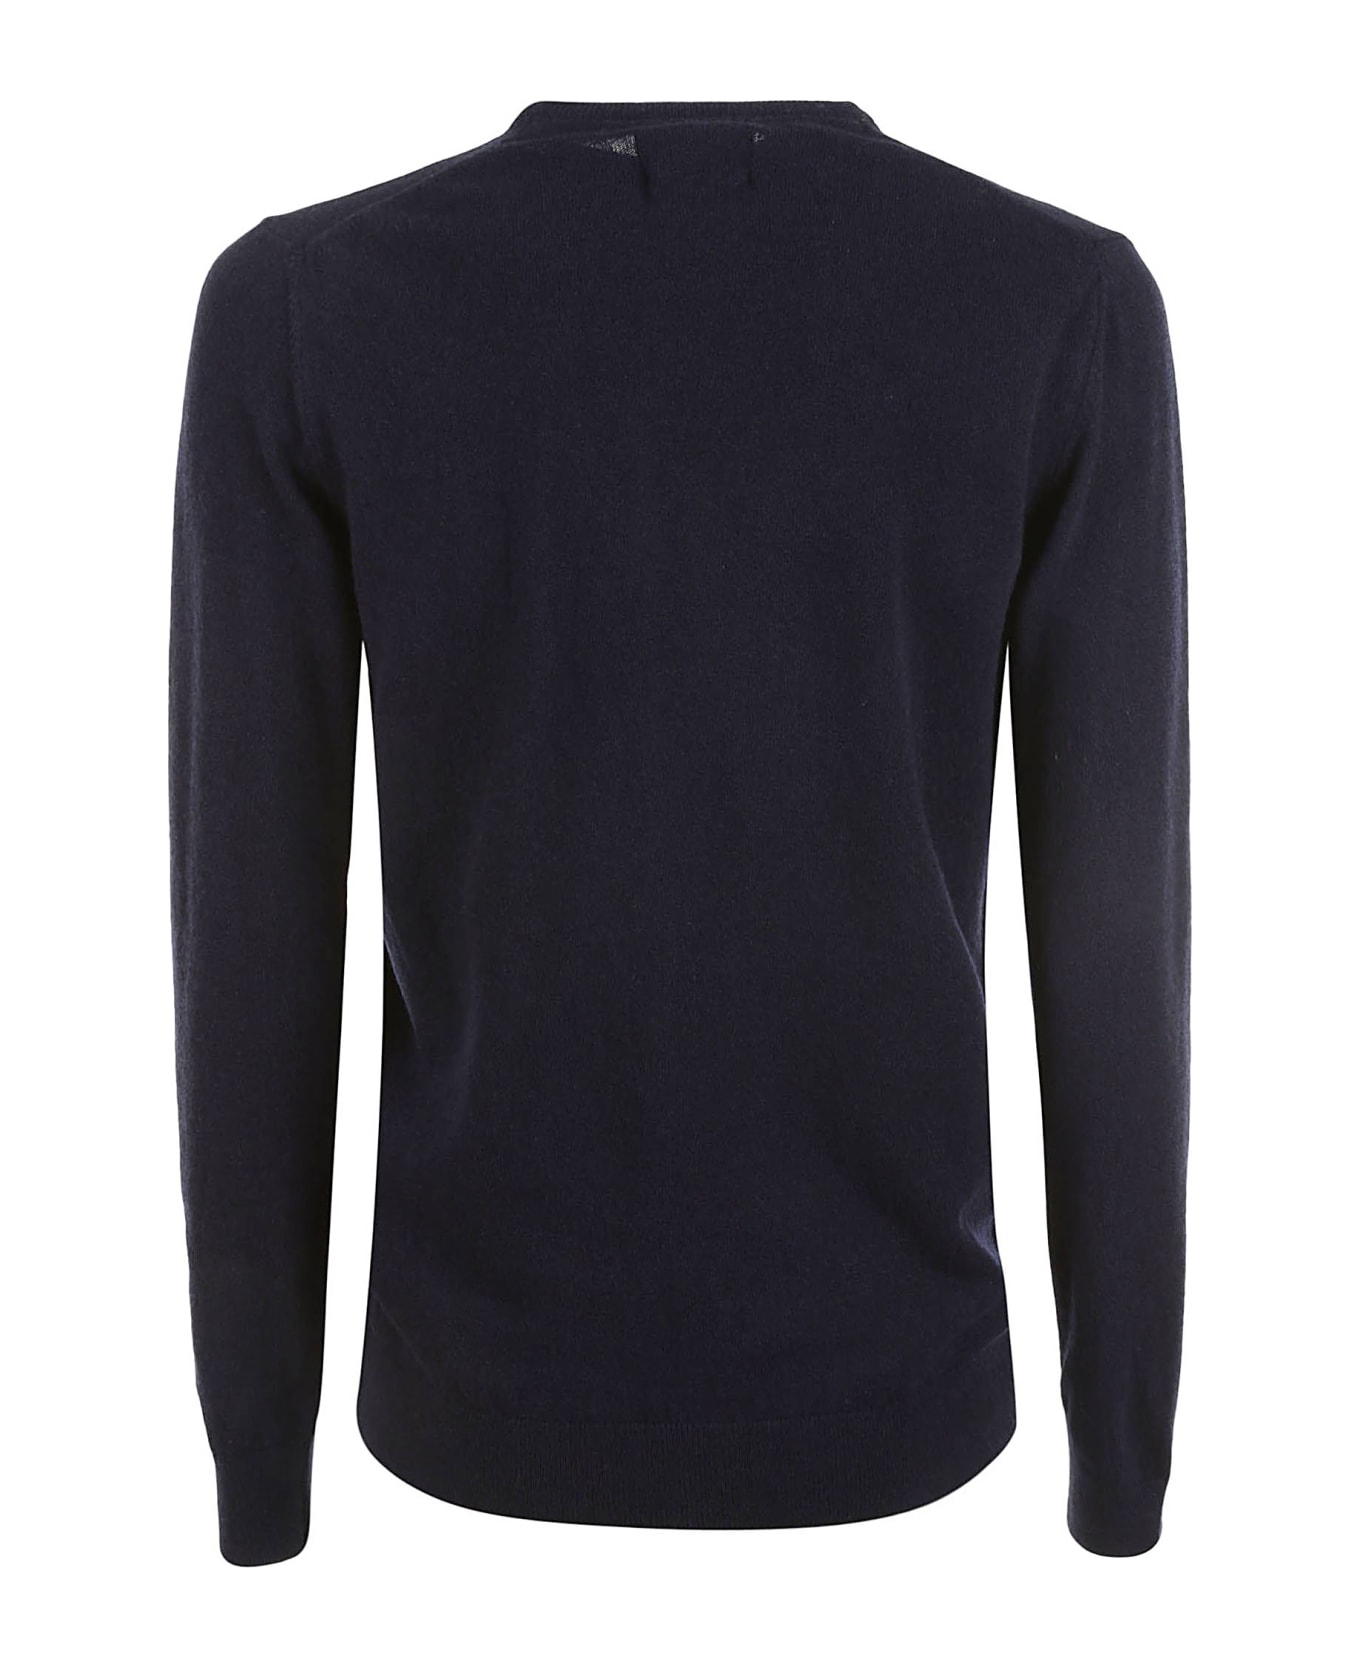 Barbour Logo Embroidered Crewneck Sweater - Navy